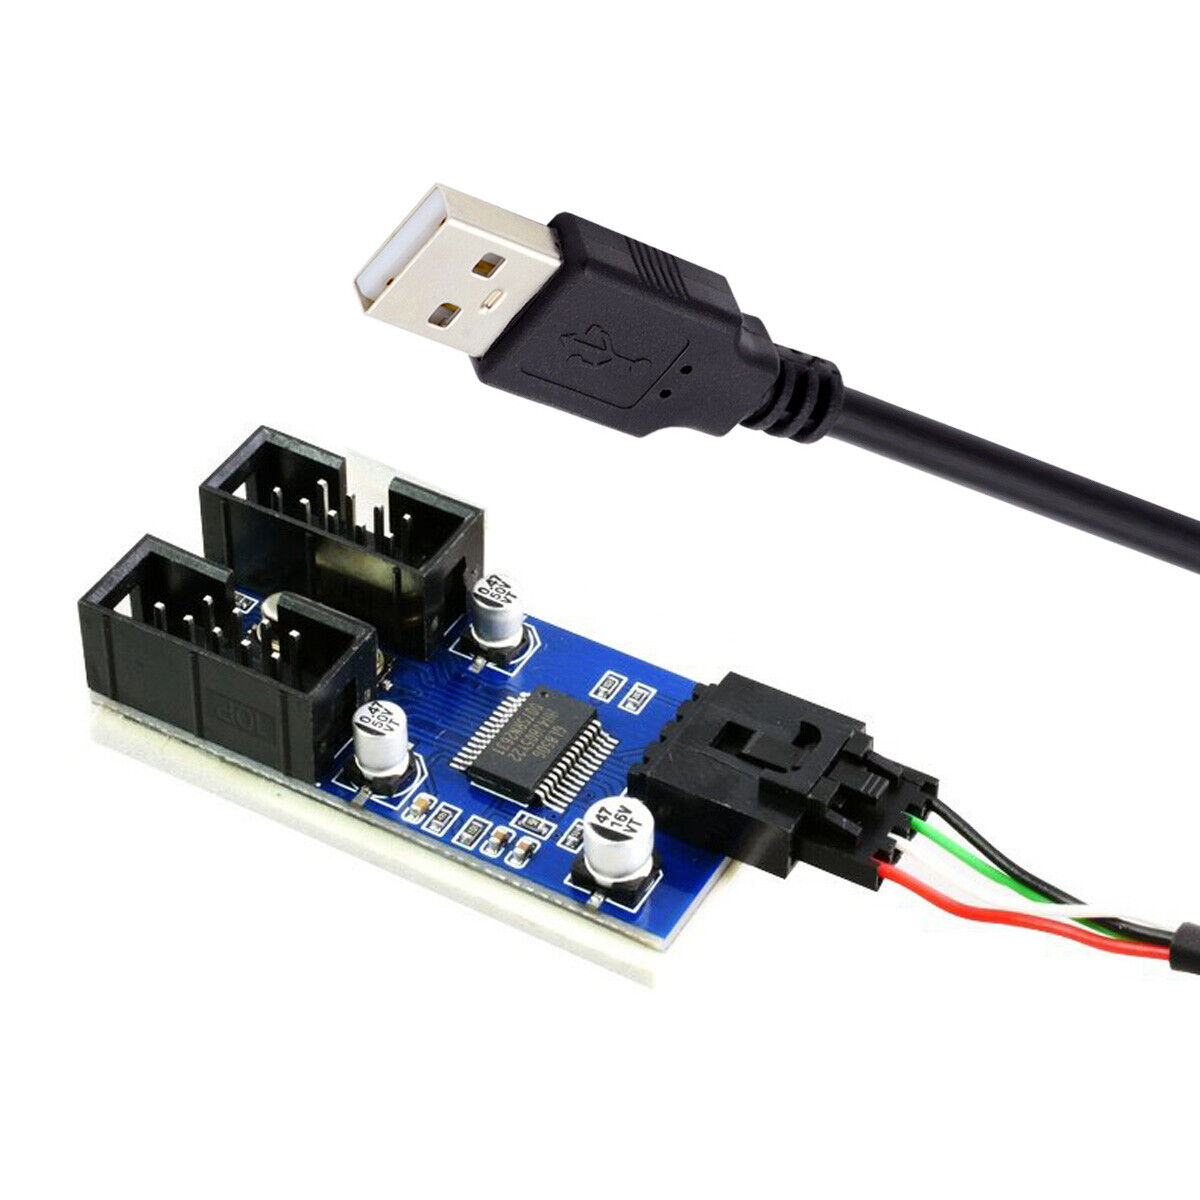 CABLECY USB 2.0 Type-A Male 1 to 2 Female Motherboard 9pin HUB Port Multilier